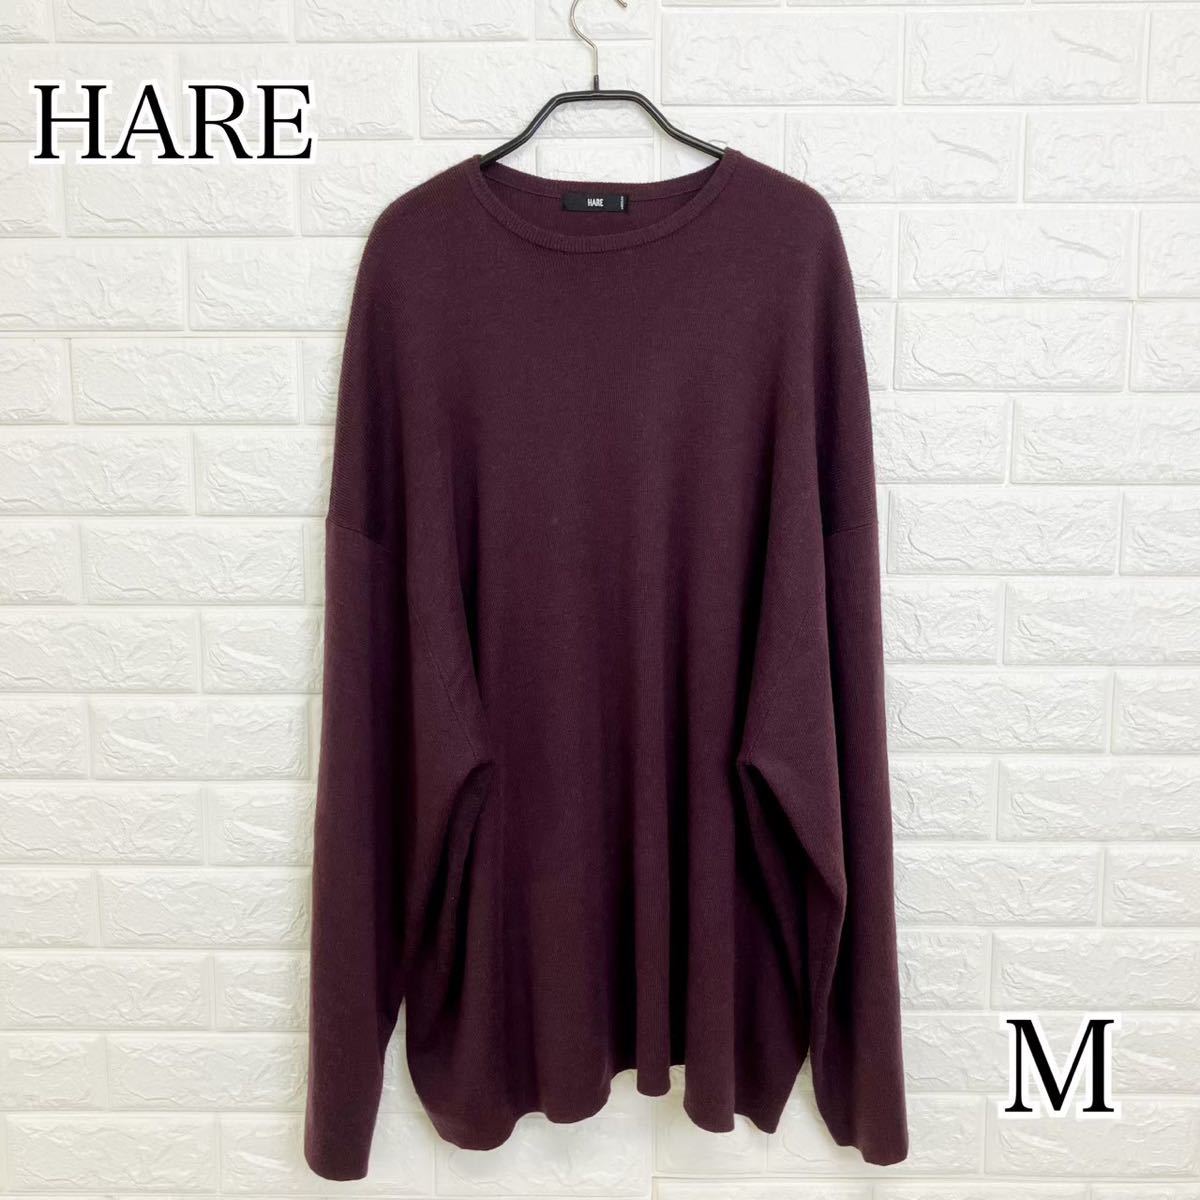 HARE Hare plain knitted sweater HA020043AD M size purple color purple free shipping 